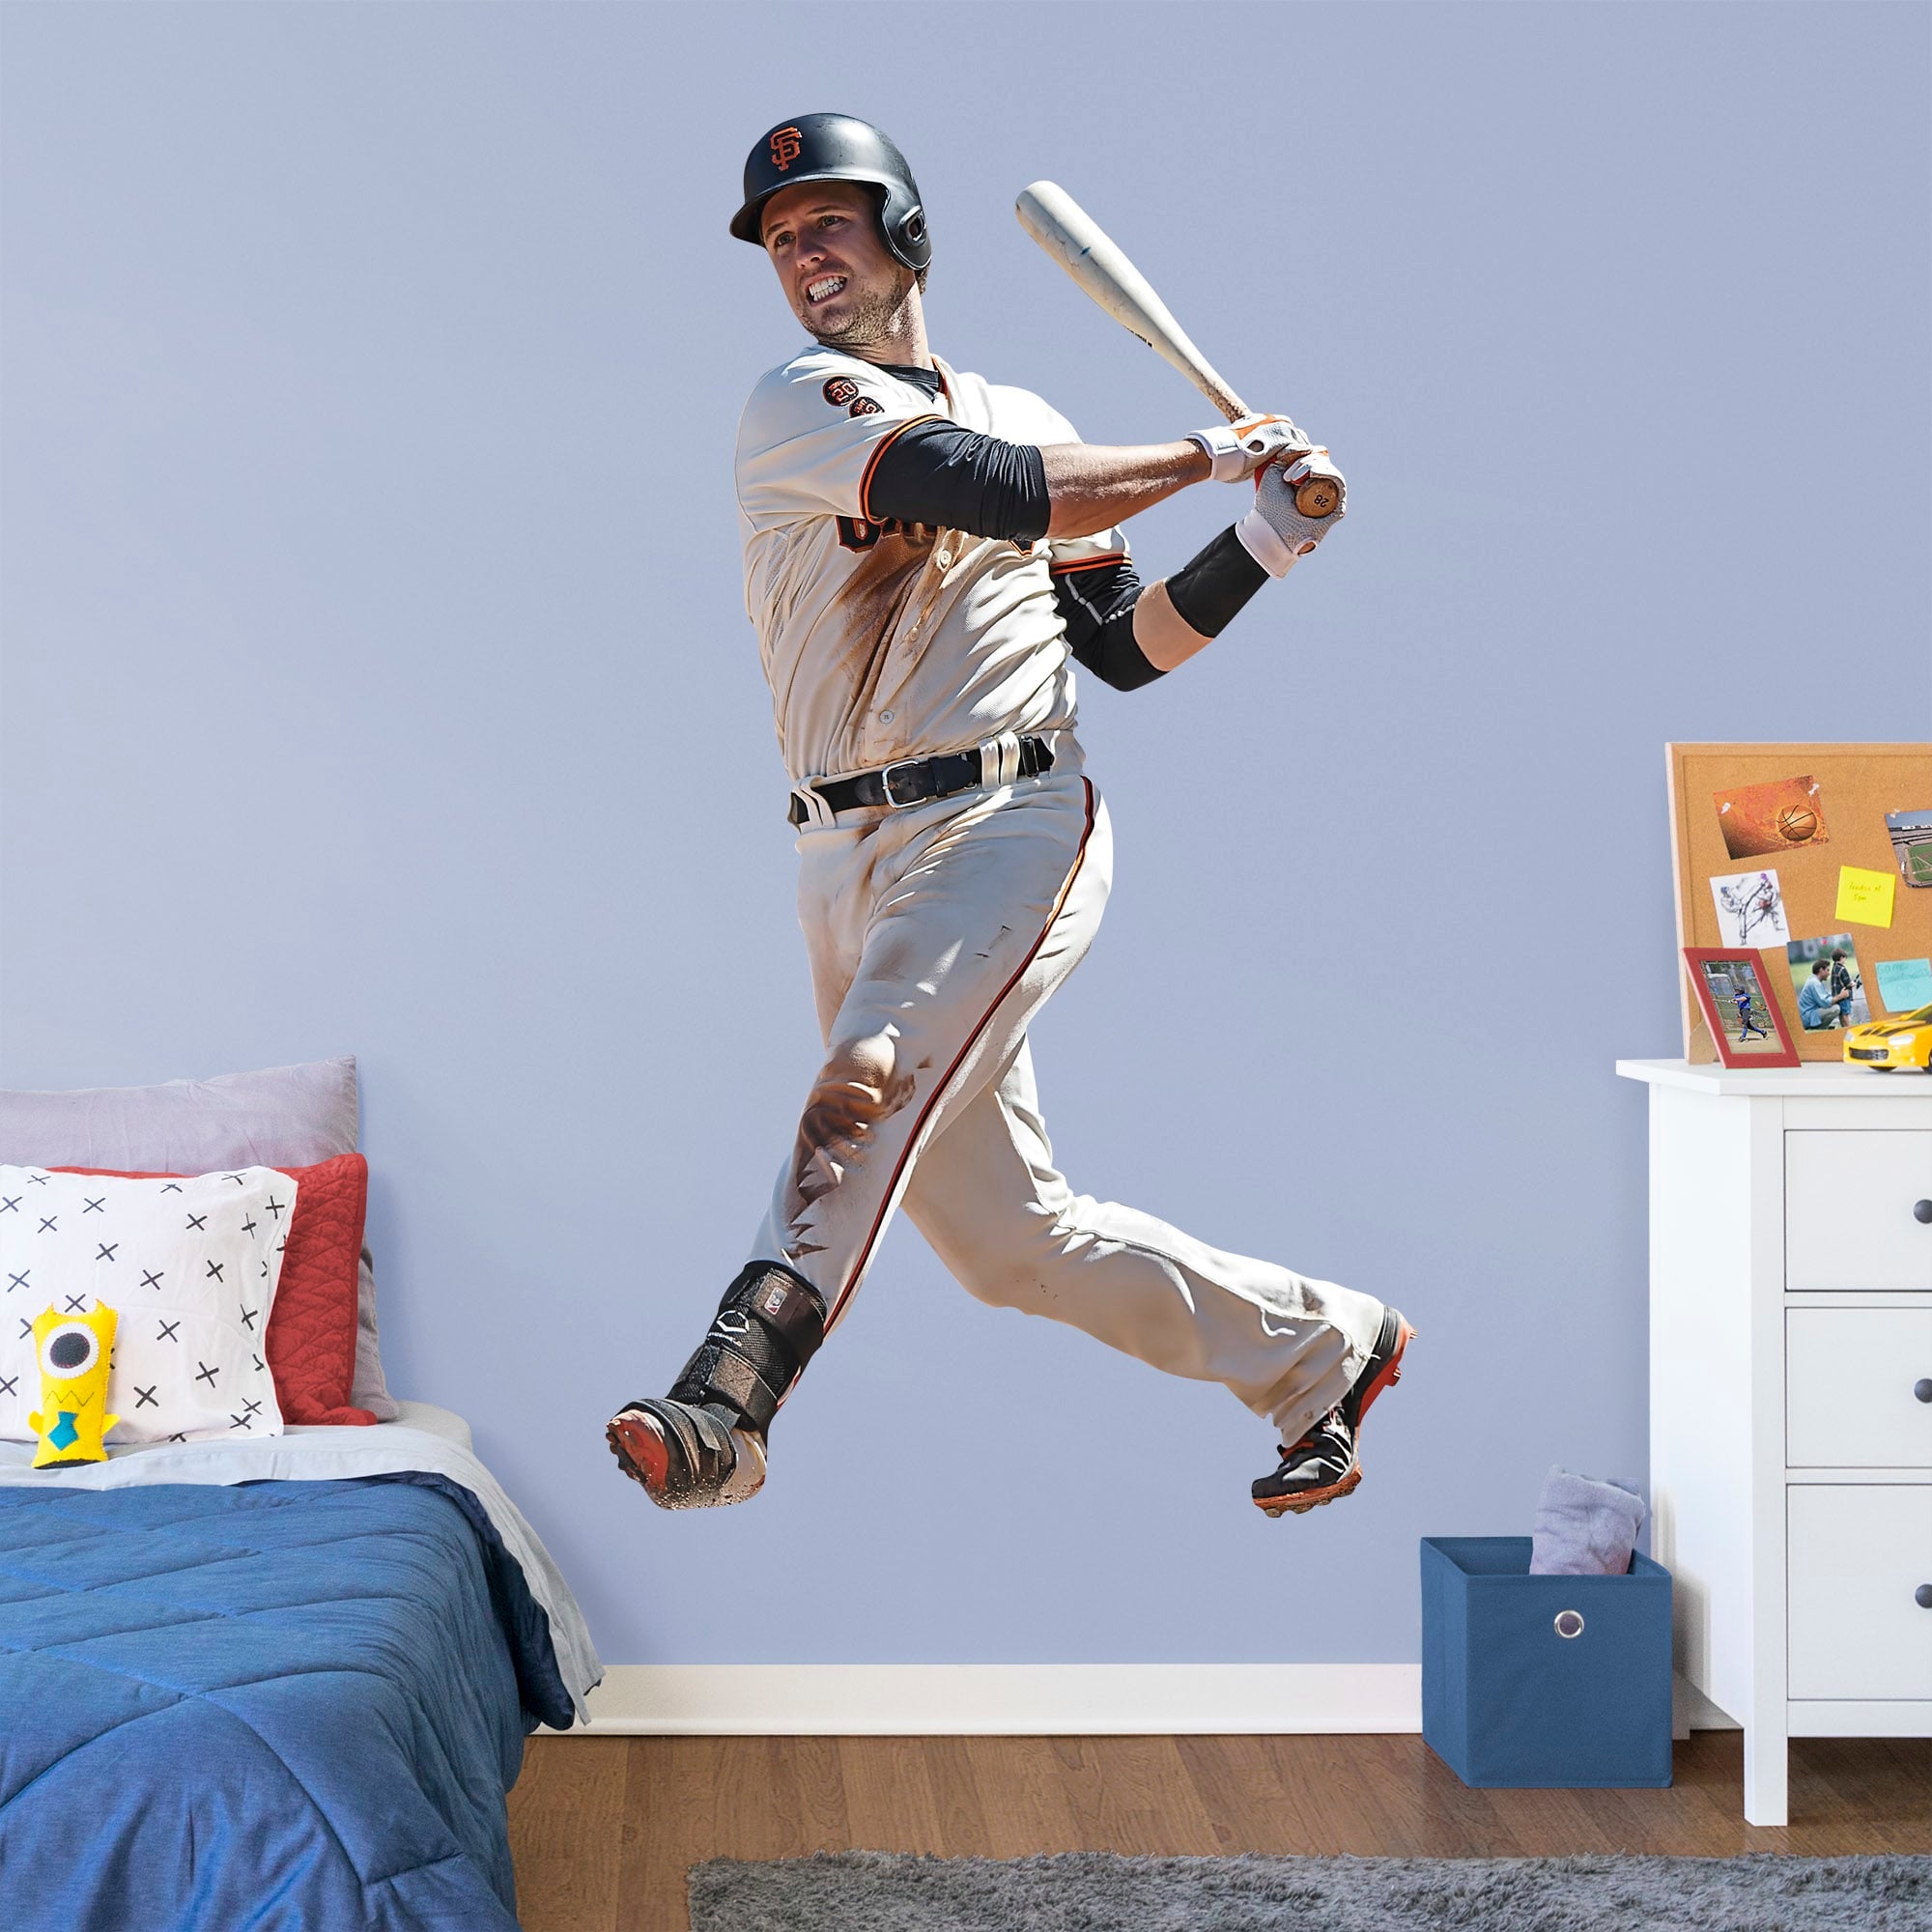 Buster Posey for San Francisco Giants - Officially Licensed MLB Removable Wall Decal Life-Size Athlete + 2 Decals (49"W x 77"H)